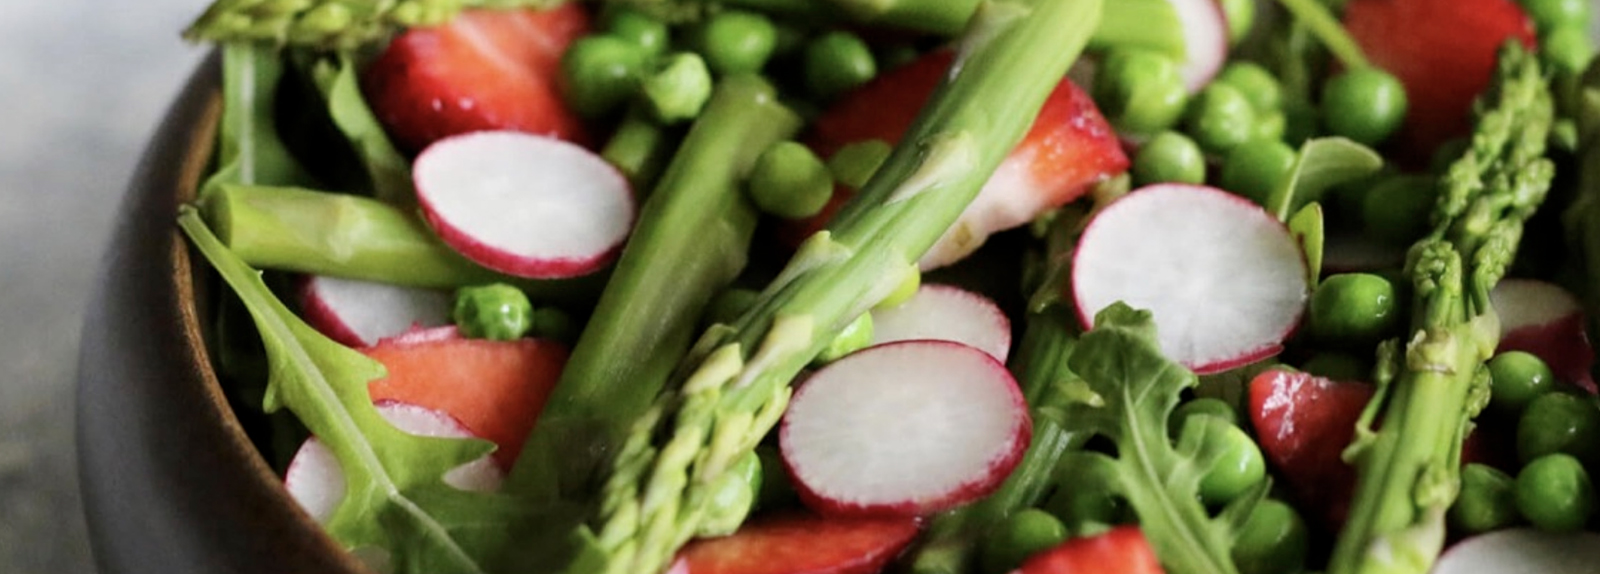 Strawberry Asparagus Salad with Tahini Dressing